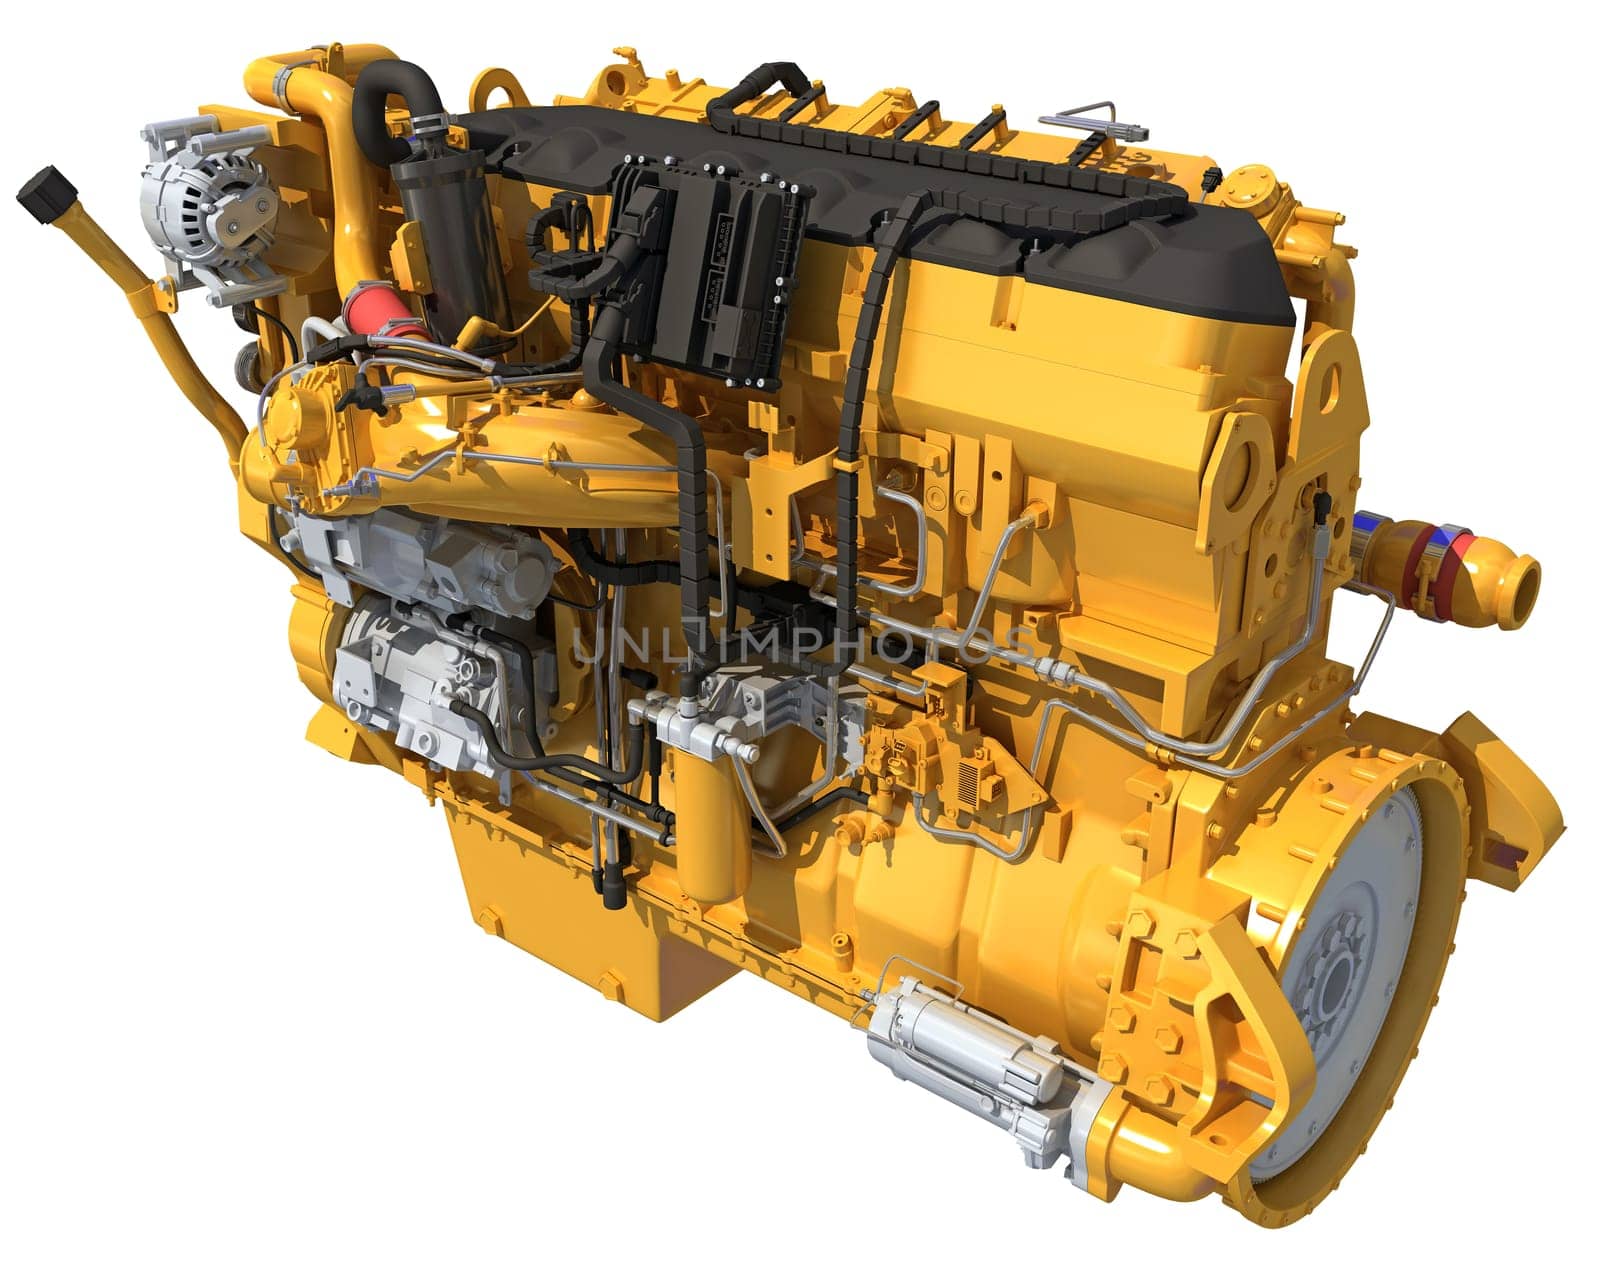 Heavy duty truck engine 3D rendering on white background by 3DHorse